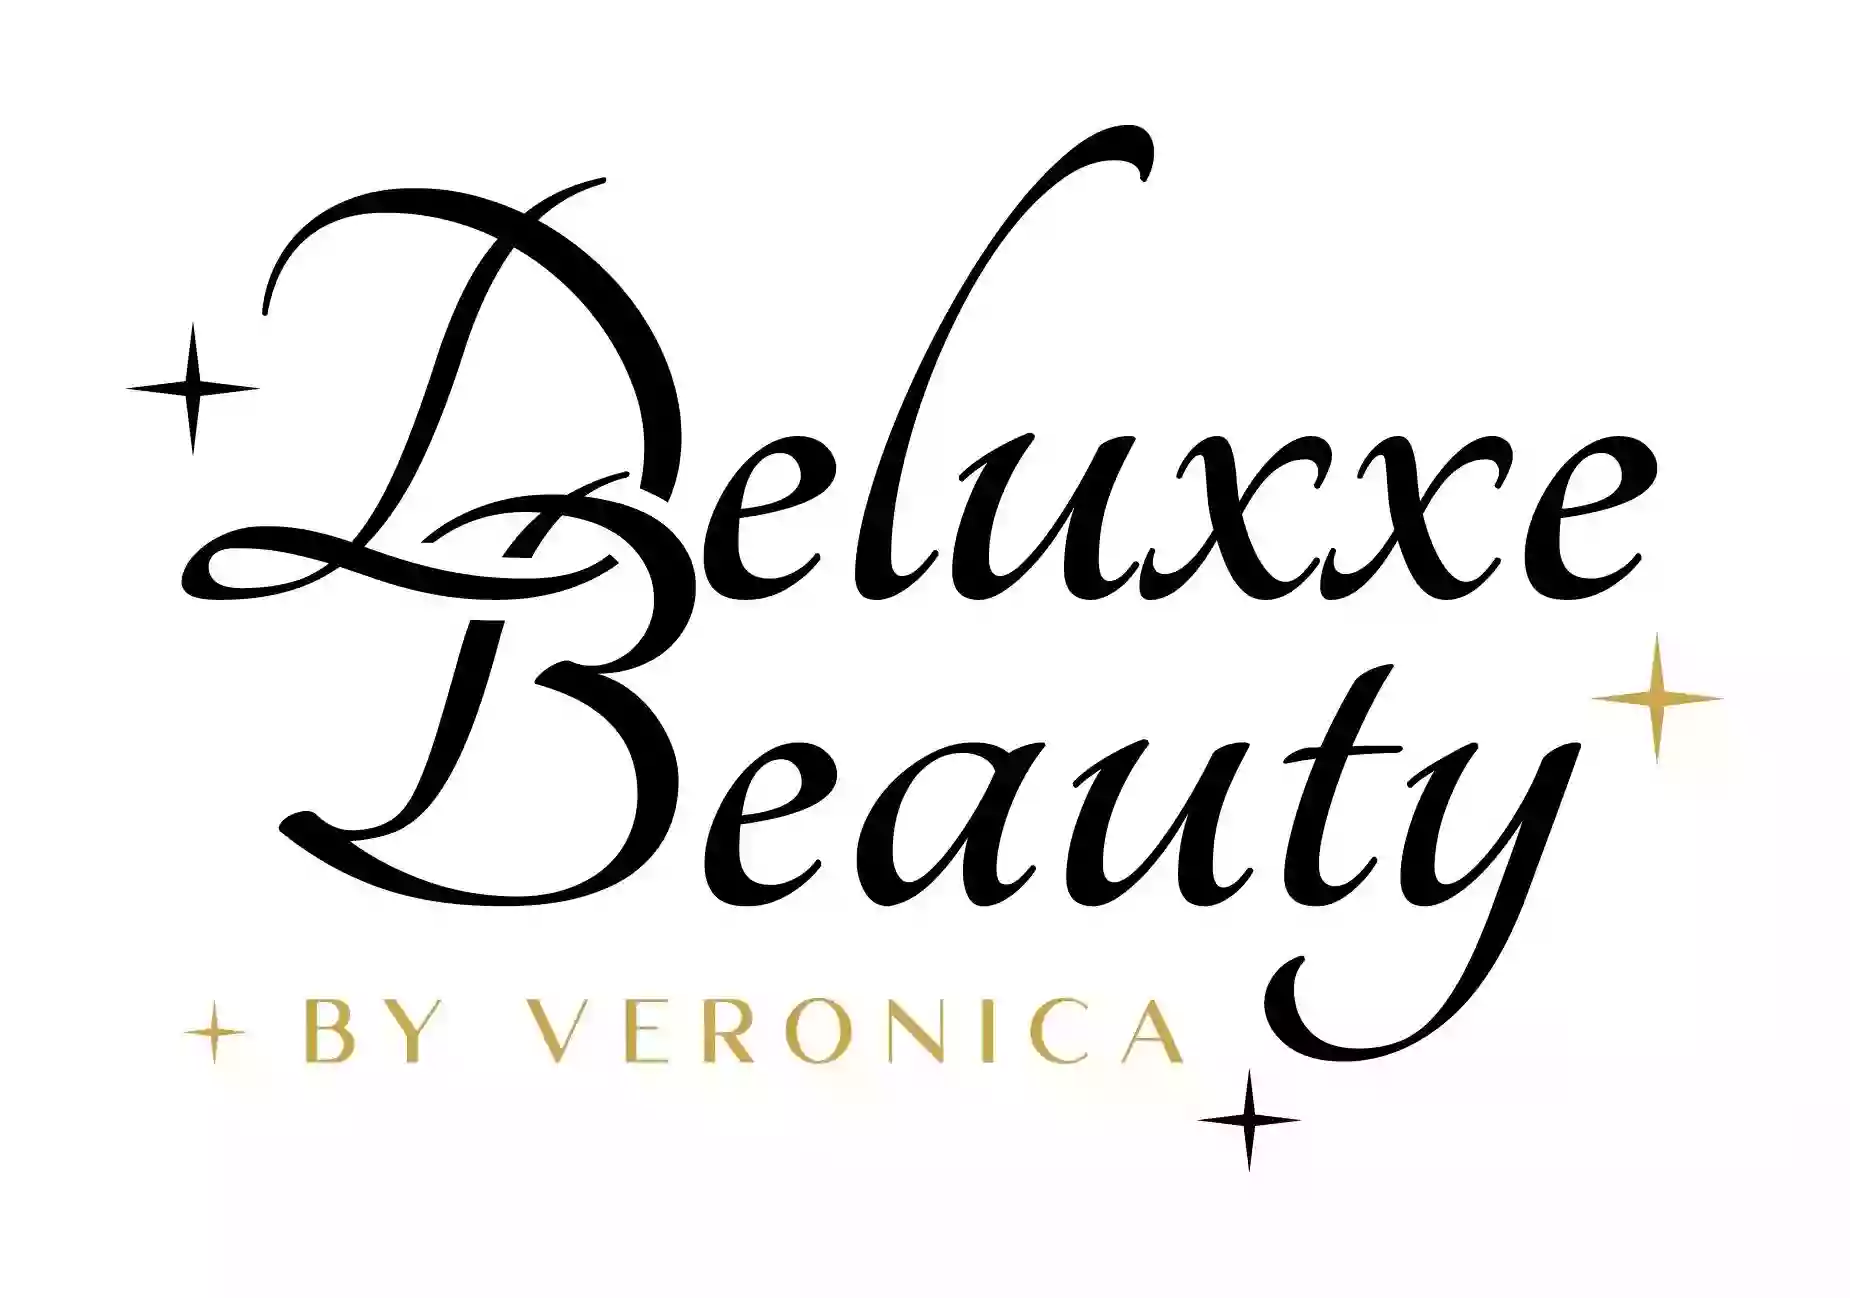 Deluxxe Beauty by Veronica